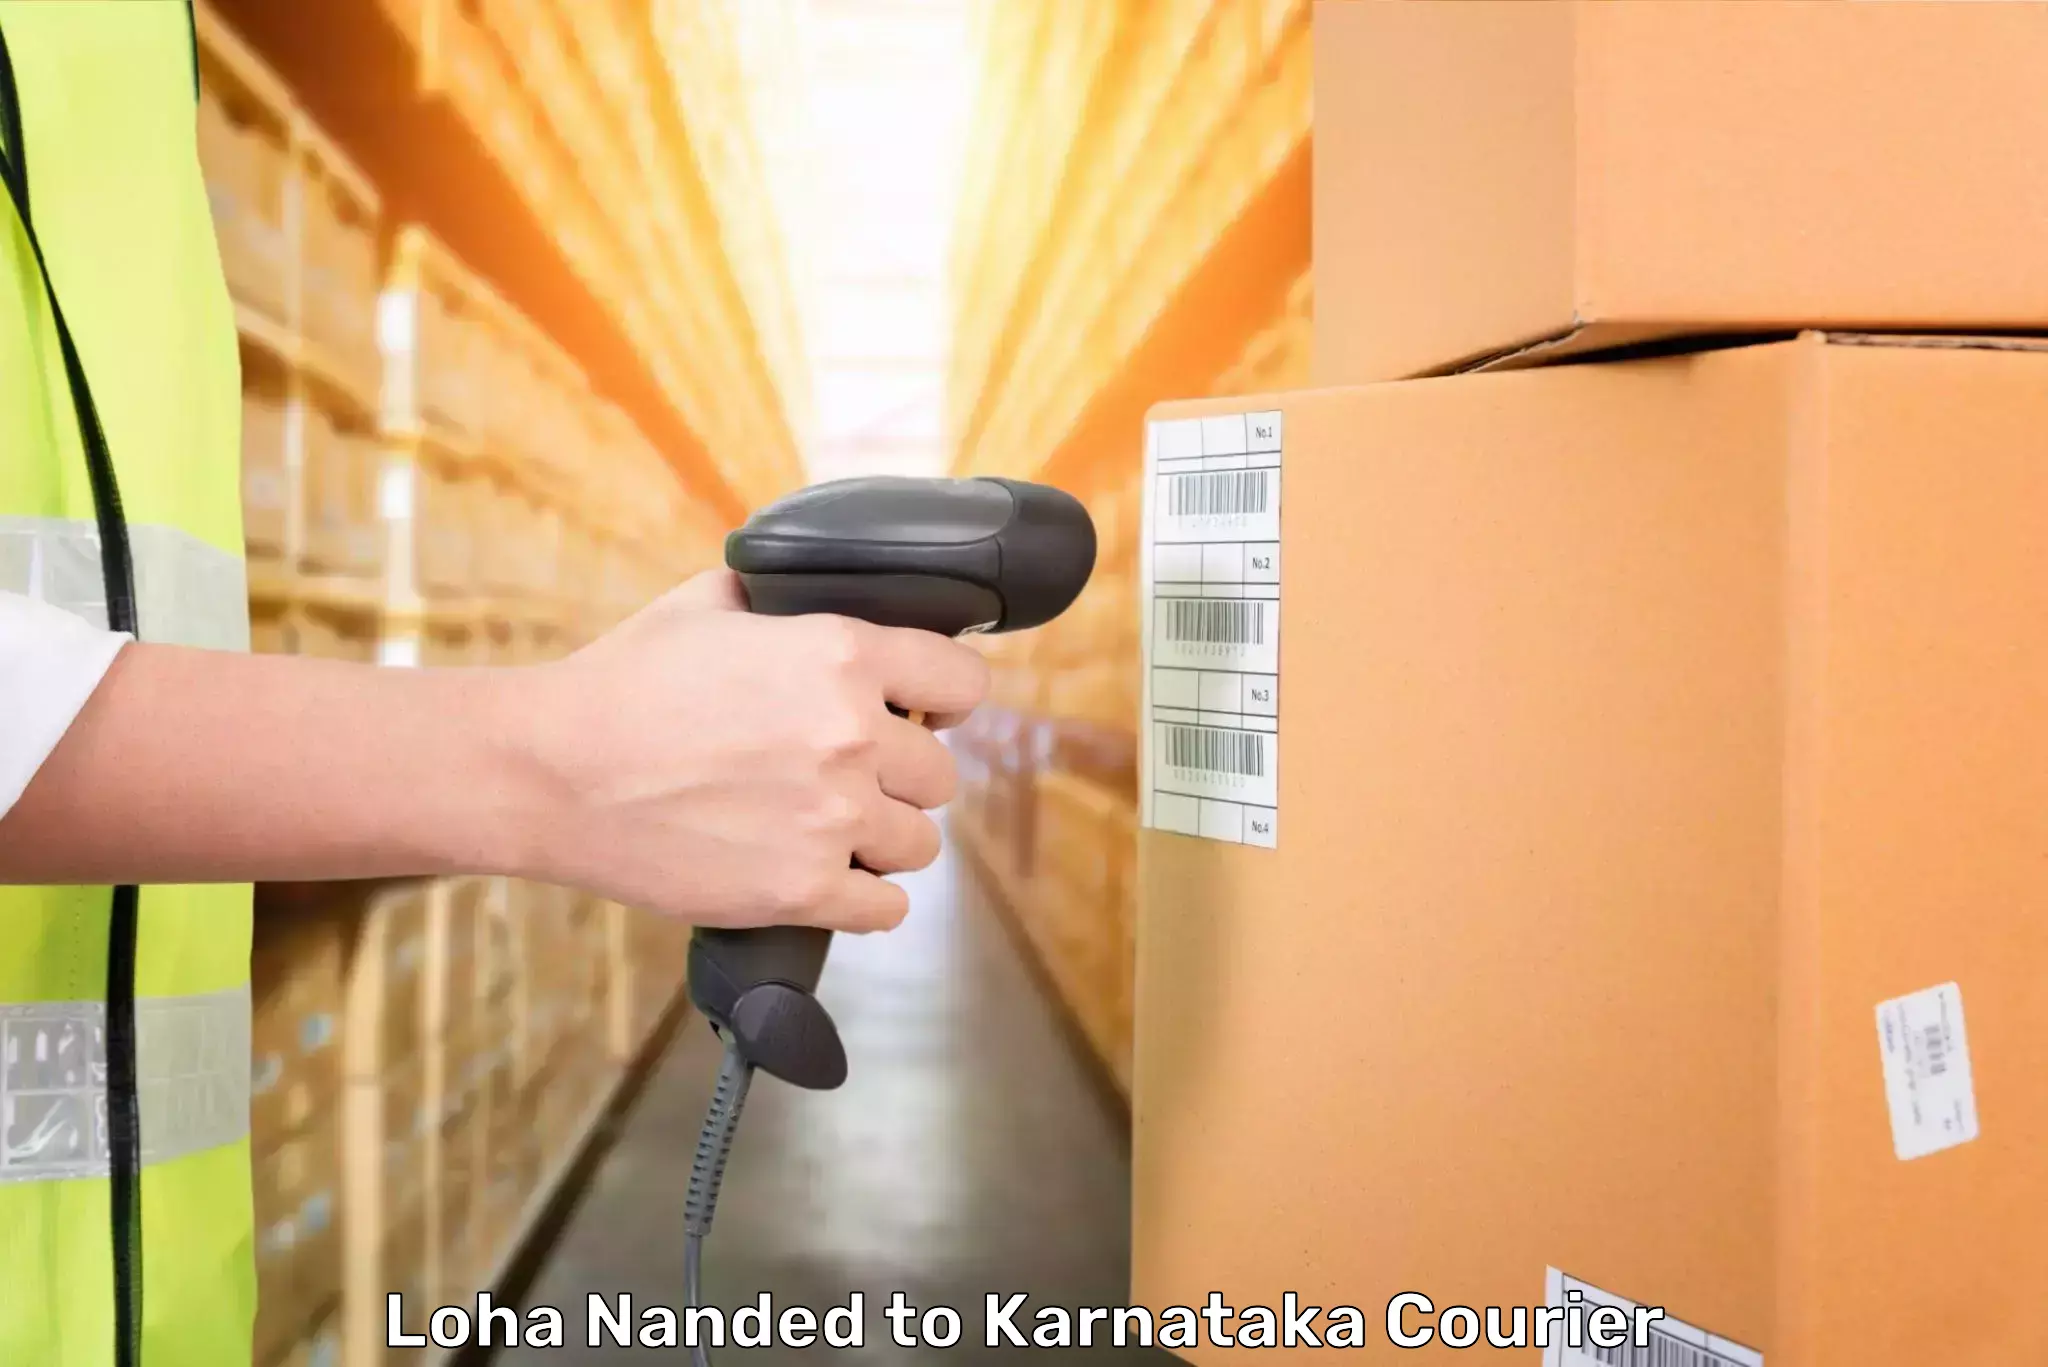 Personal effects shipping in Loha Nanded to Karnataka